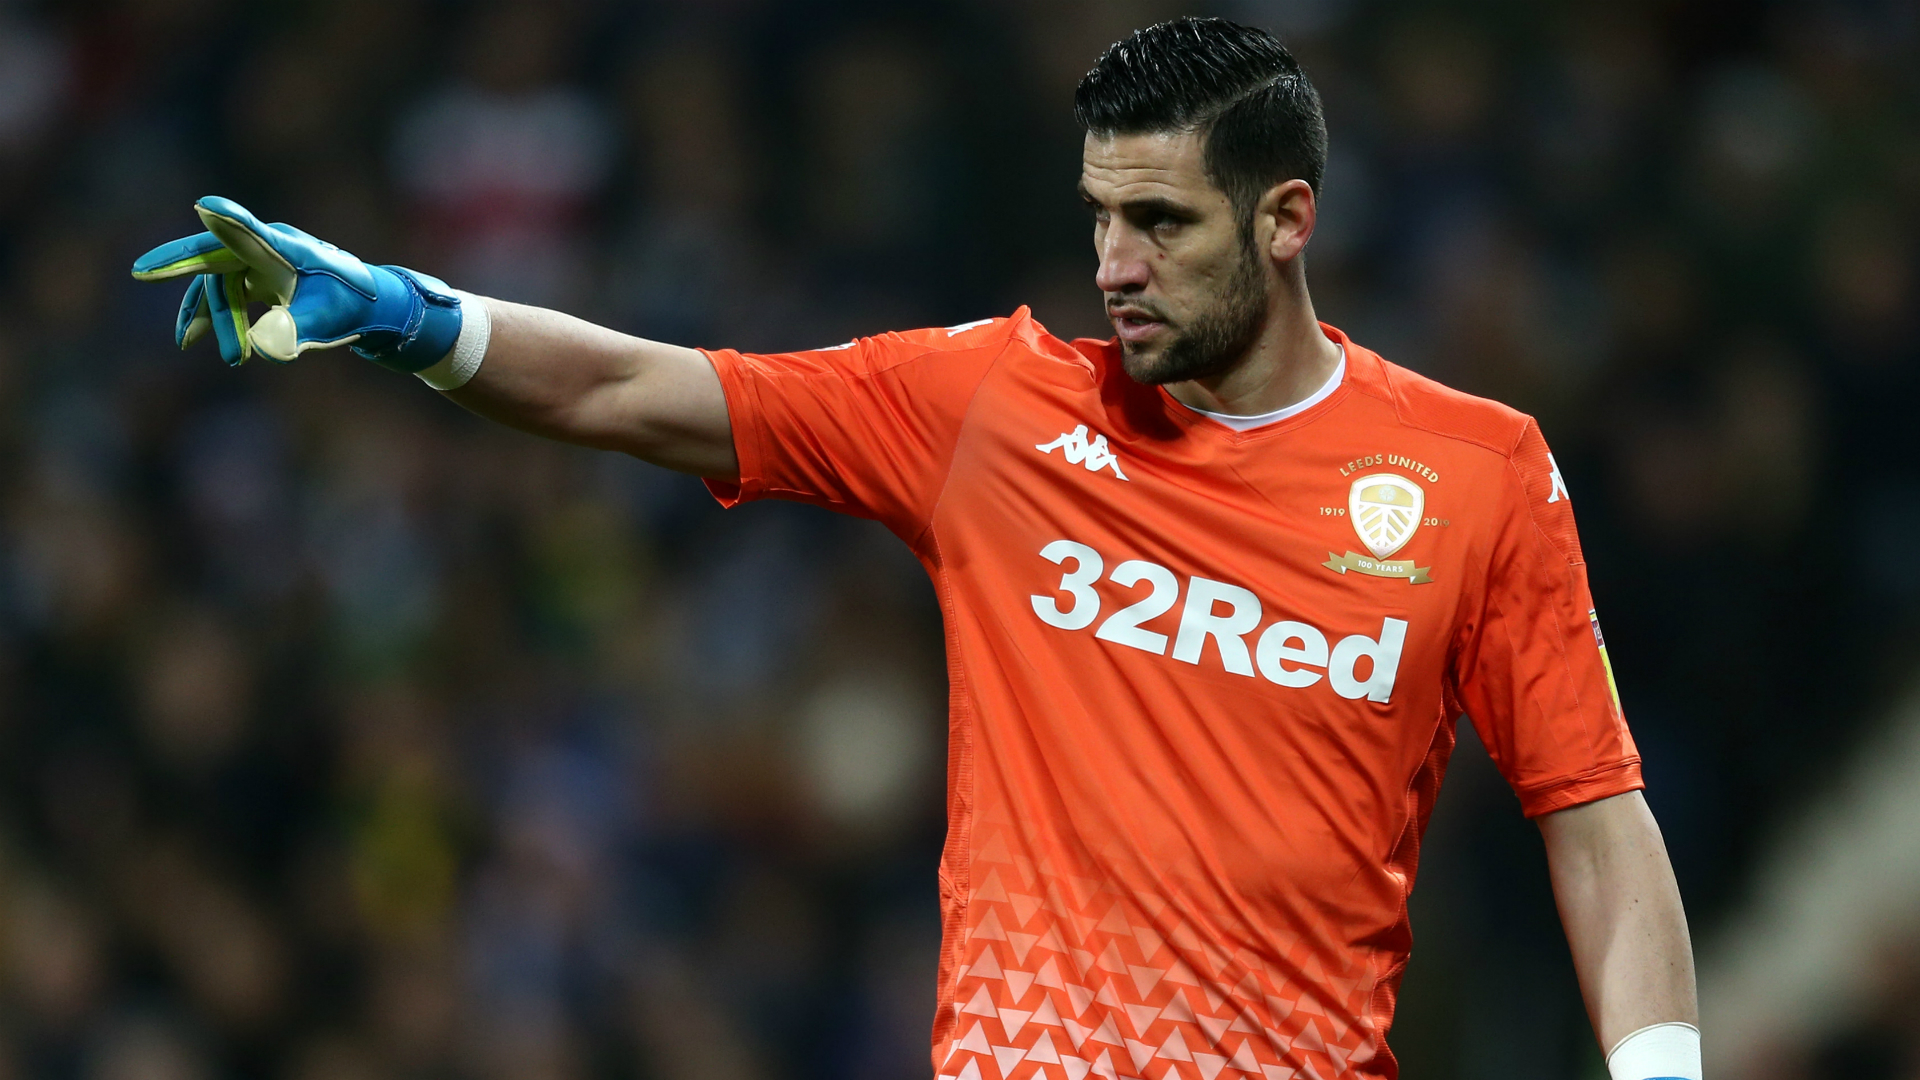 The FA has punished Kiko Casilla for abusing Jonathan Leko "with reference to race and/or colour and/or ethnic origin".